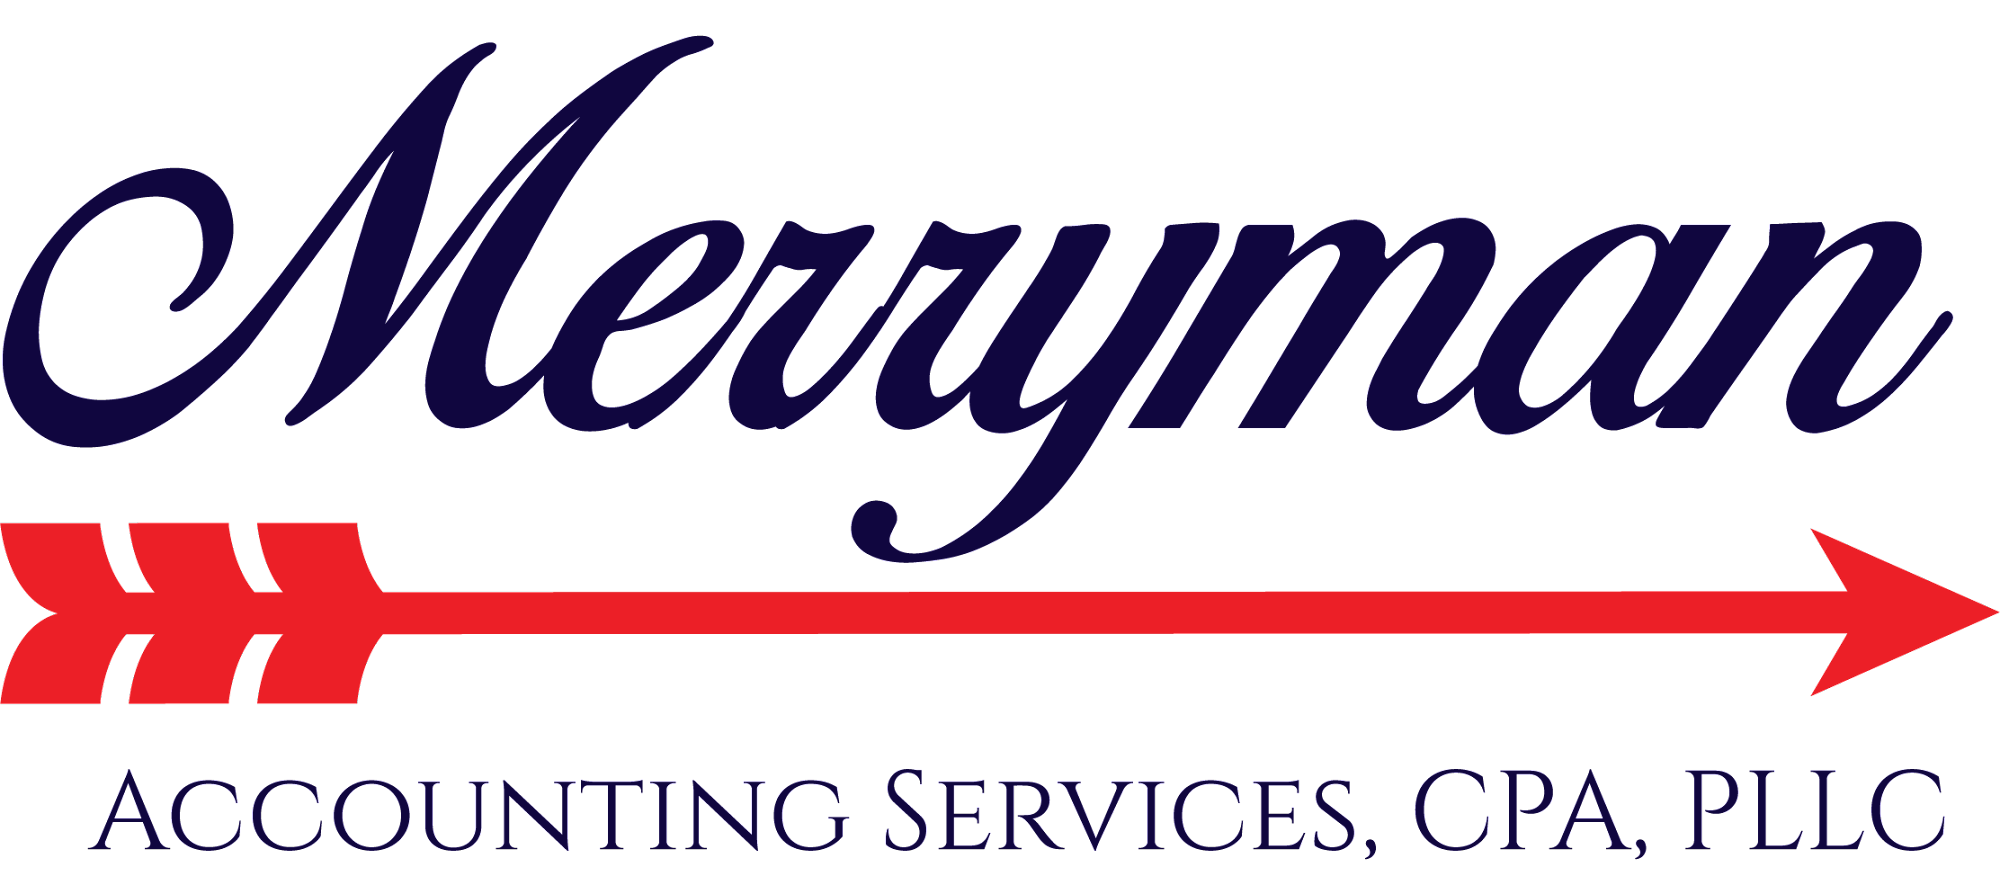 Merryman Accounting Services, CPA, PLLC 206 W Main St, Weatherford Oklahoma 73096